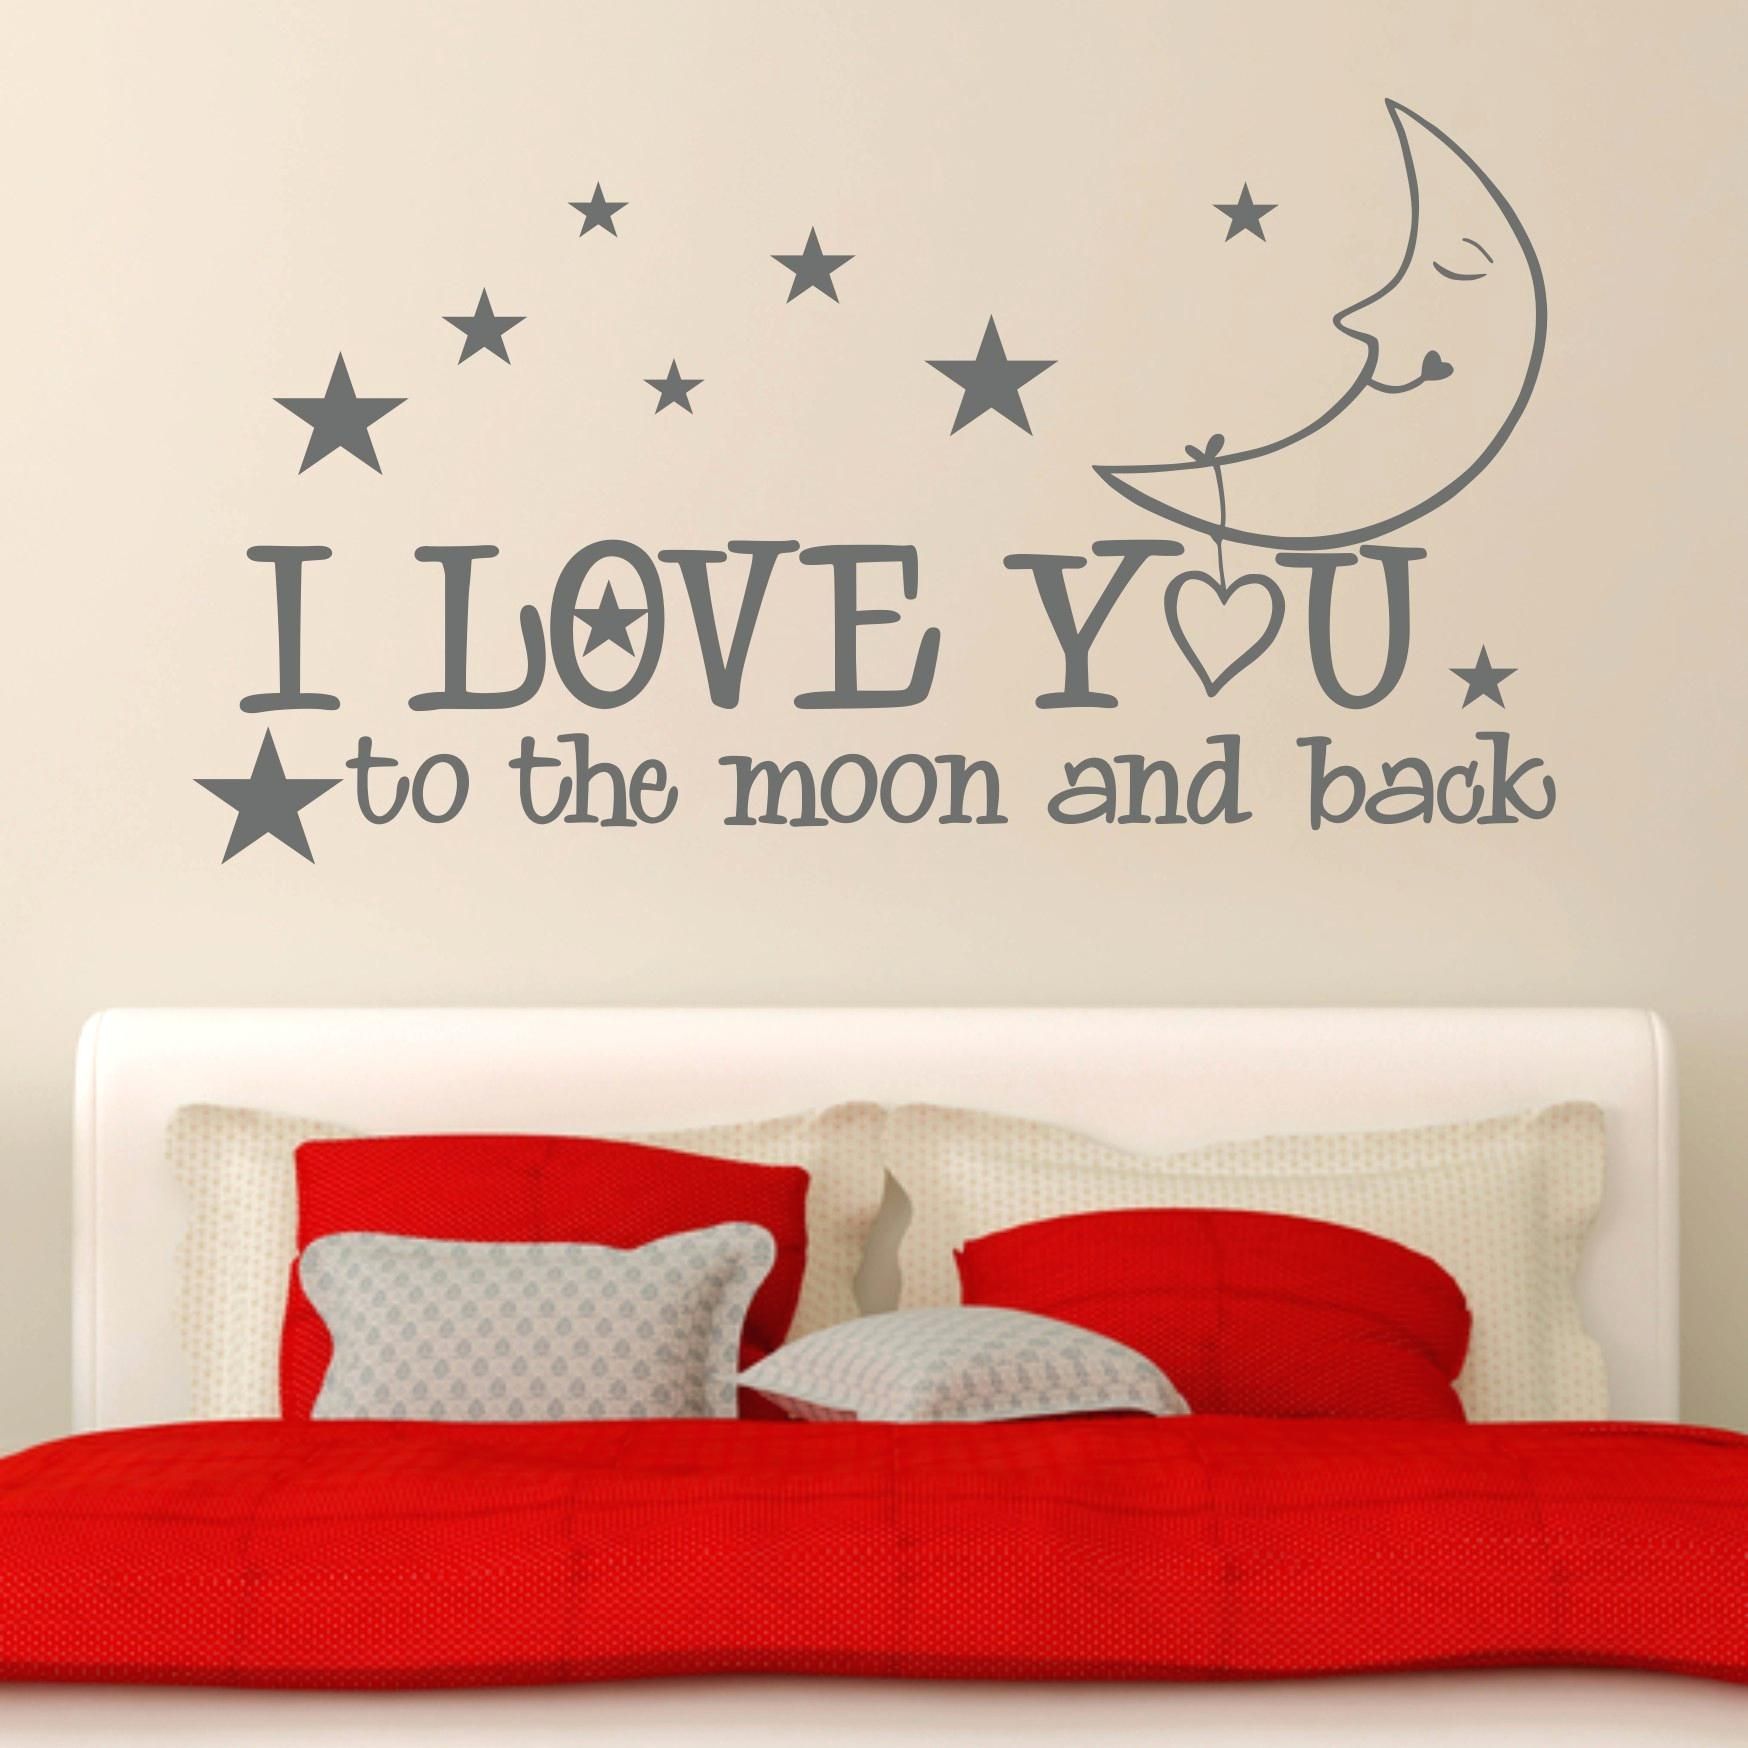 To The Moon And Back Wall Decal I Love You To The Moon And Back Big With Regard To Best And Newest I Love You To The Moon And Back Wall Art (Gallery 20 of 20)